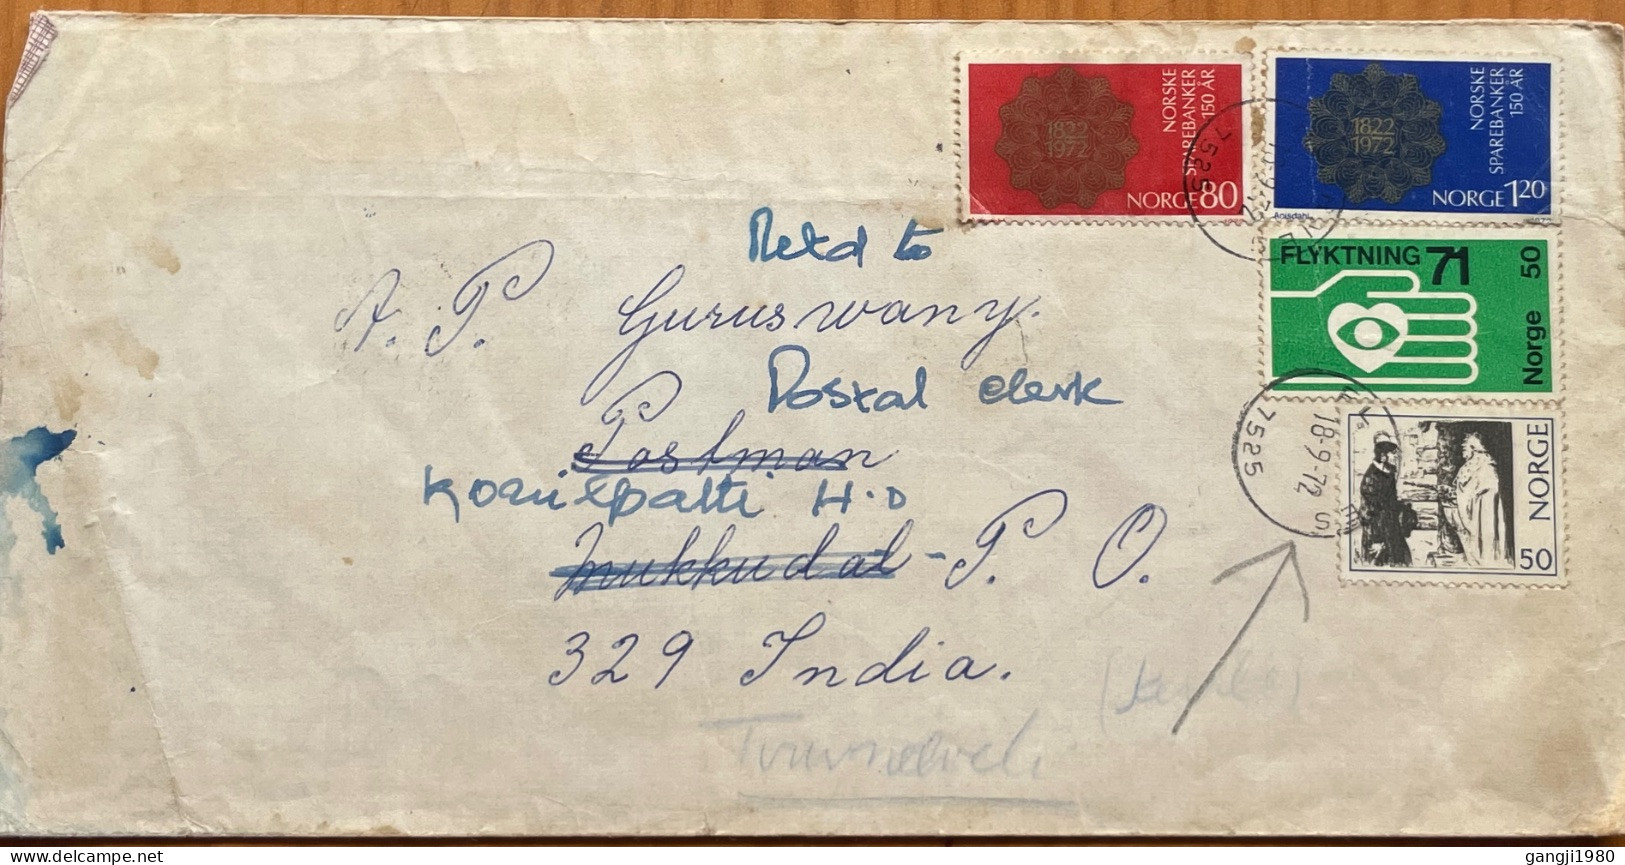 NORWAY TO INDIA1972, COVER POSTAL CODE INCLUDE, SAVING BANK, HELPING HAND, PREACHER & KING, FLOKENES, MUKKUDAL & KOATIP - Covers & Documents